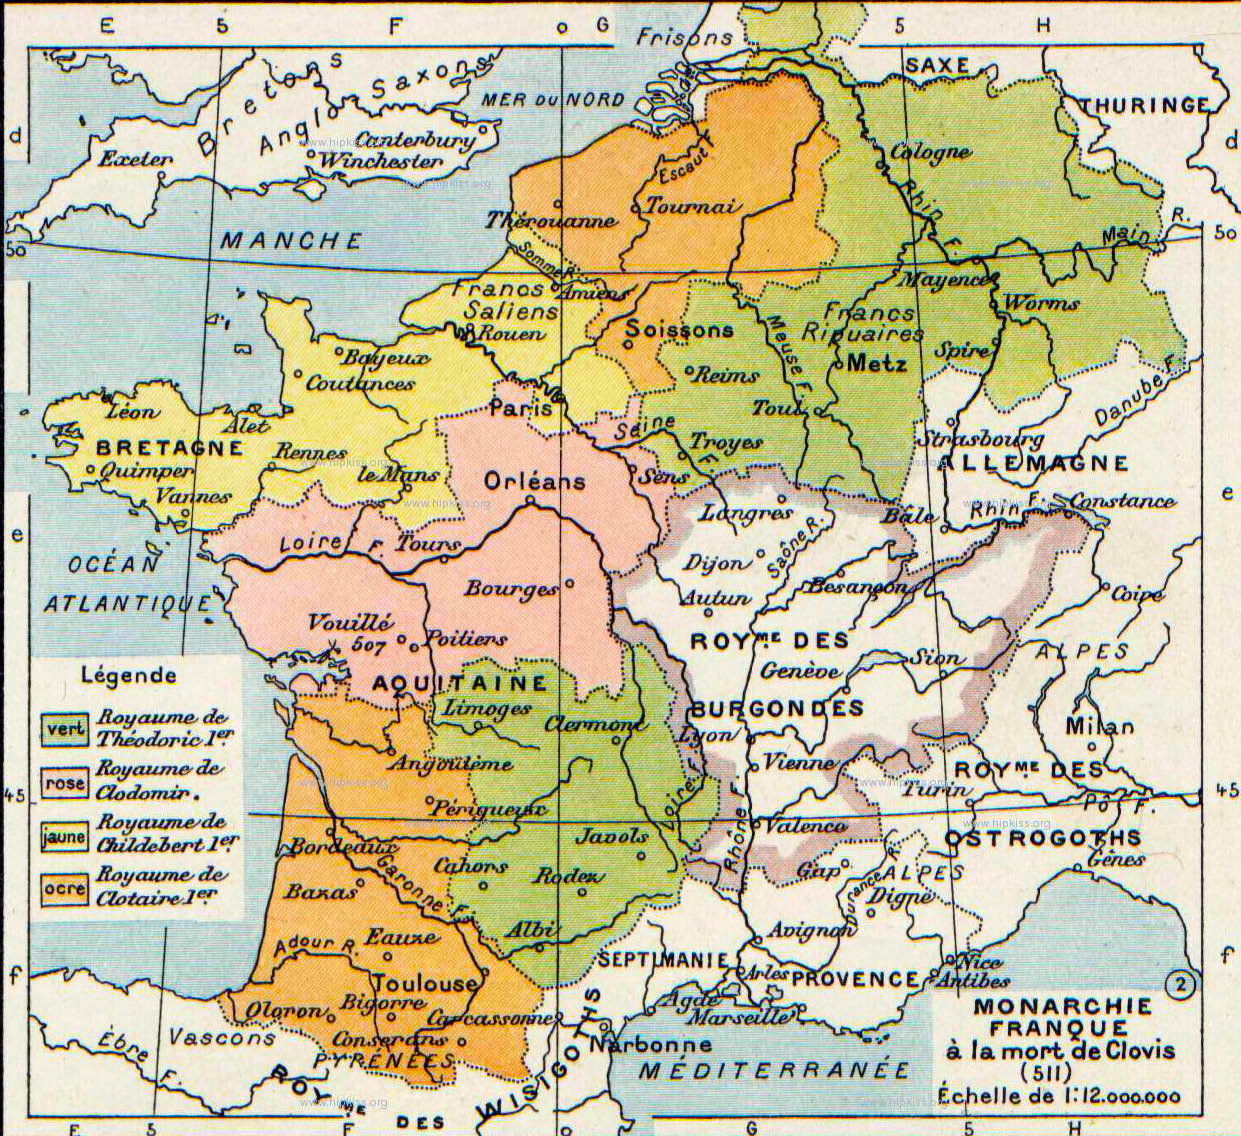 A historical map of the Frankish Kingdom at the Time of Clovis' Death in 511, in French. The map shows the regions, borders, cities, and rivers of the kingdom. The kingdom is split between Clovis’ four sons: Theodoric I, Clodomir, Childebert, Chlotar I.